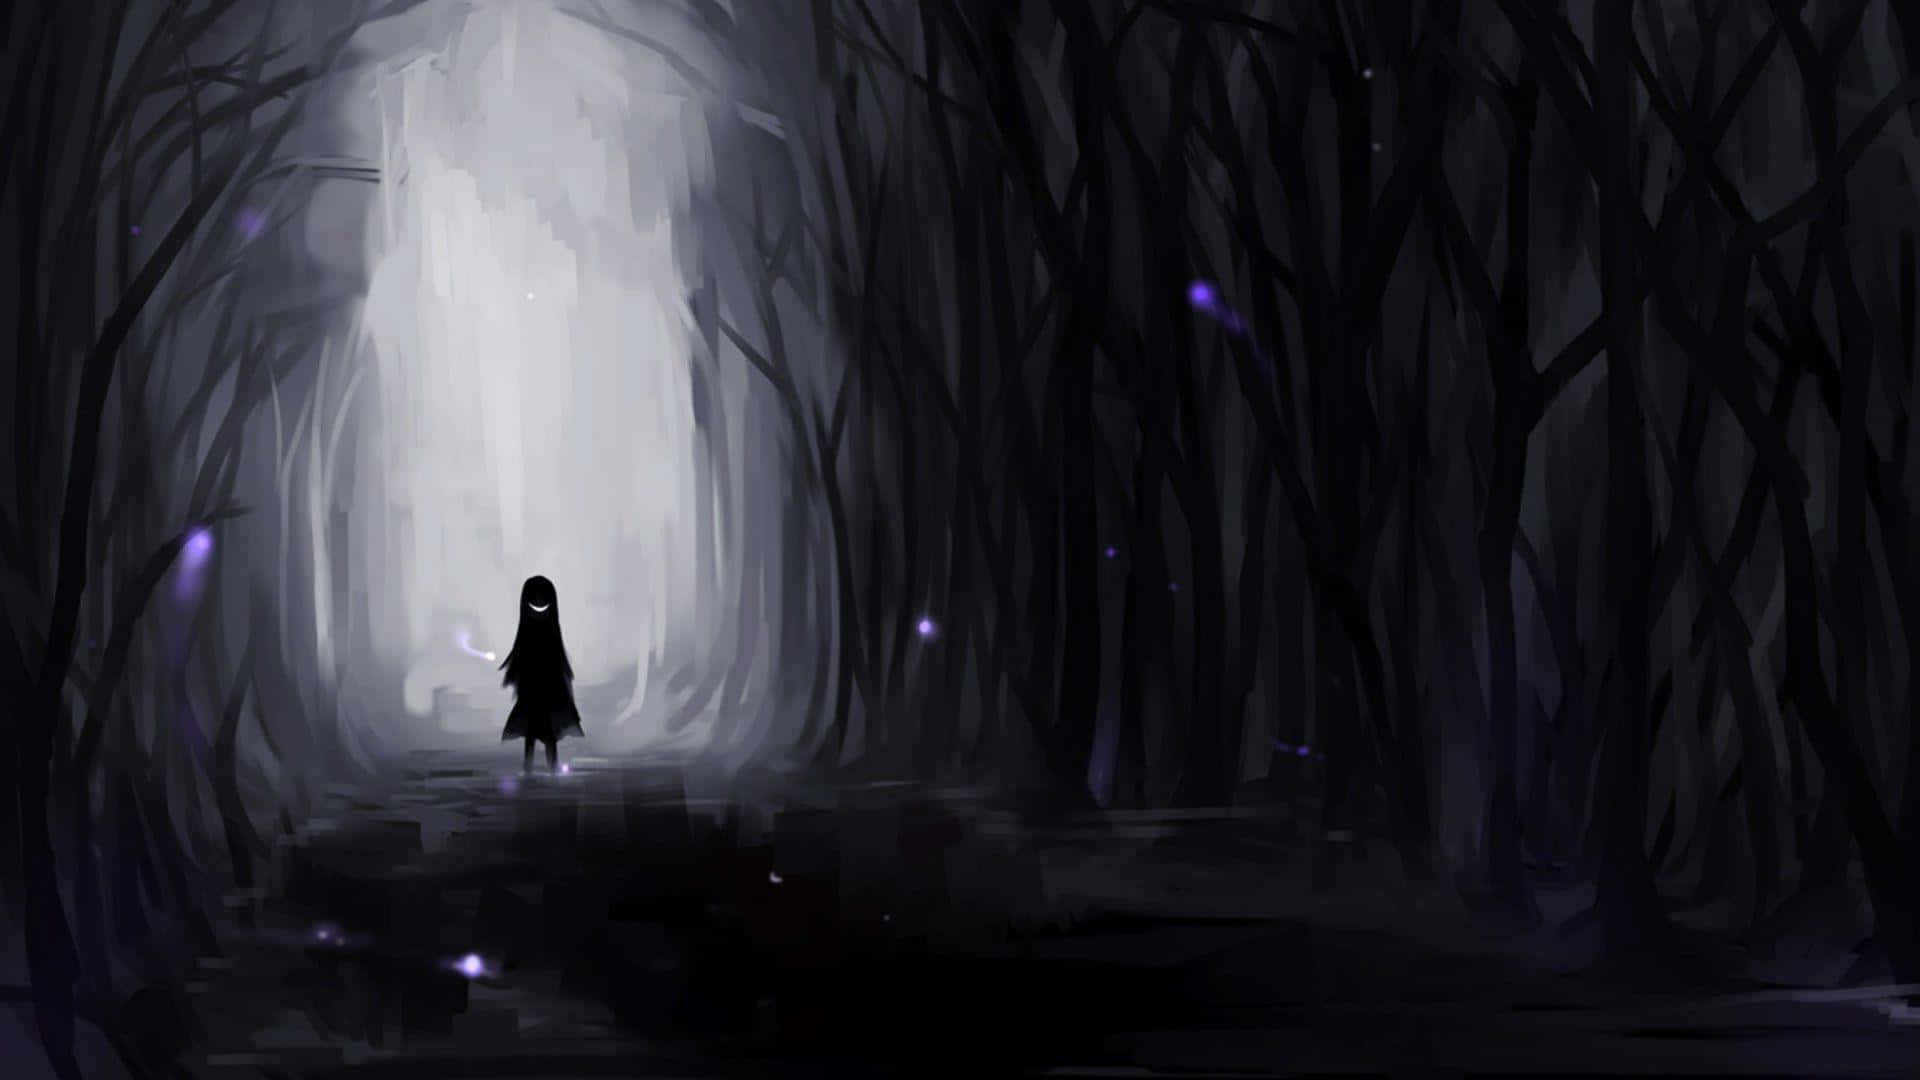 Cool Sad Anime Girl Silhouette In A Dark Forest Wallpaper